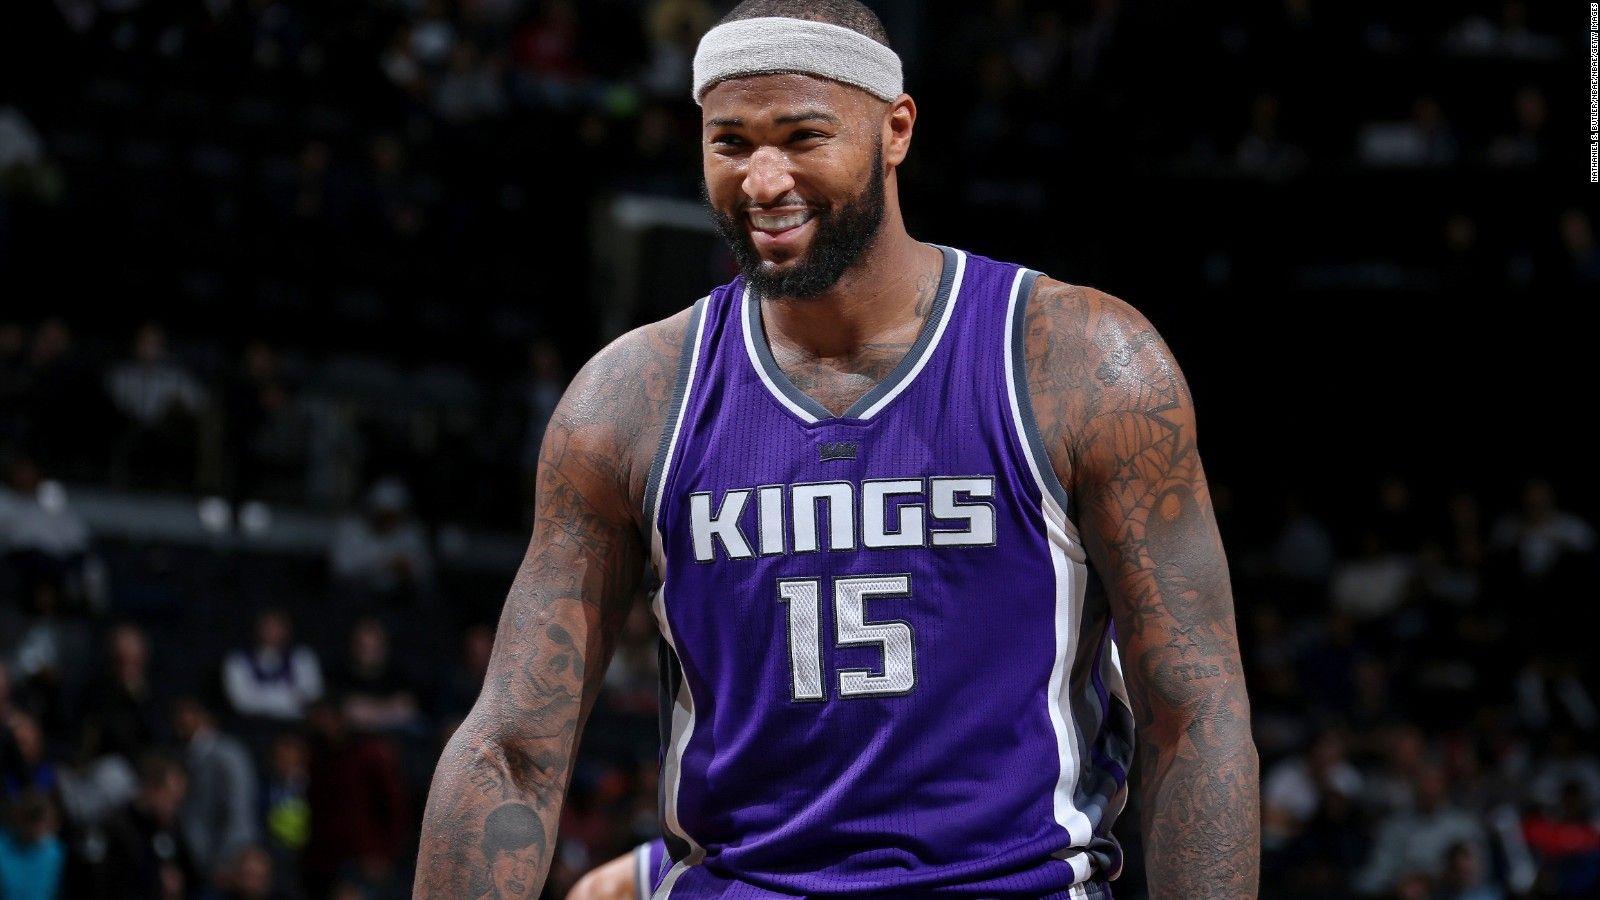 DeMarcus Cousins traded to the Pelicans